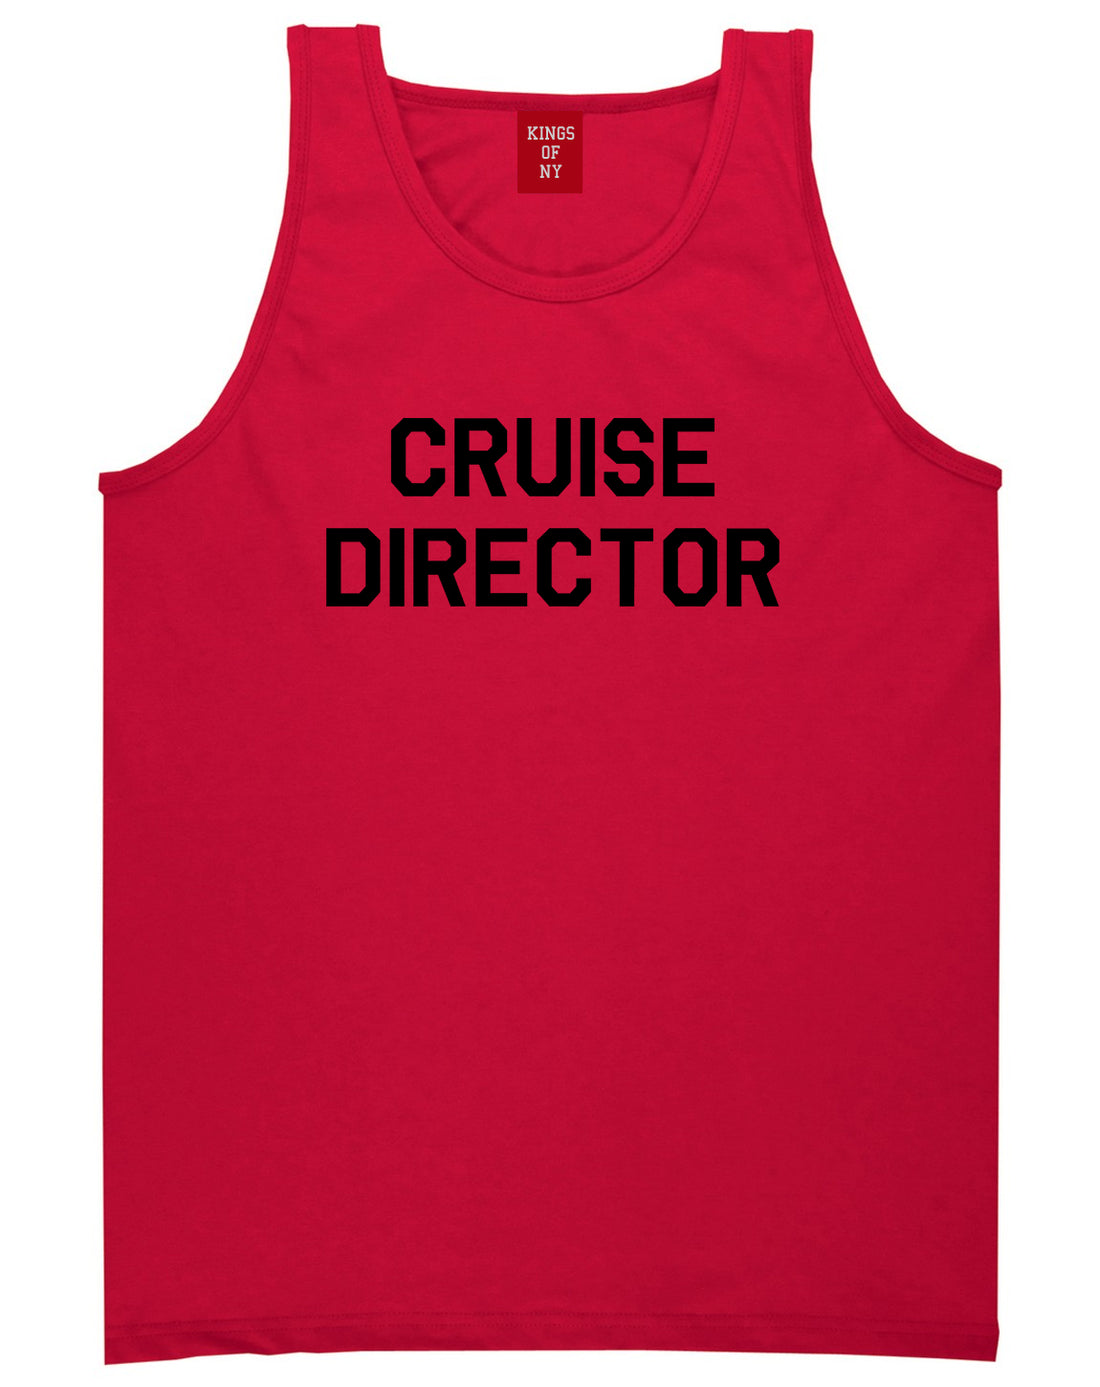 Cruise_Director Mens Red Tank Top Shirt by Kings Of NY